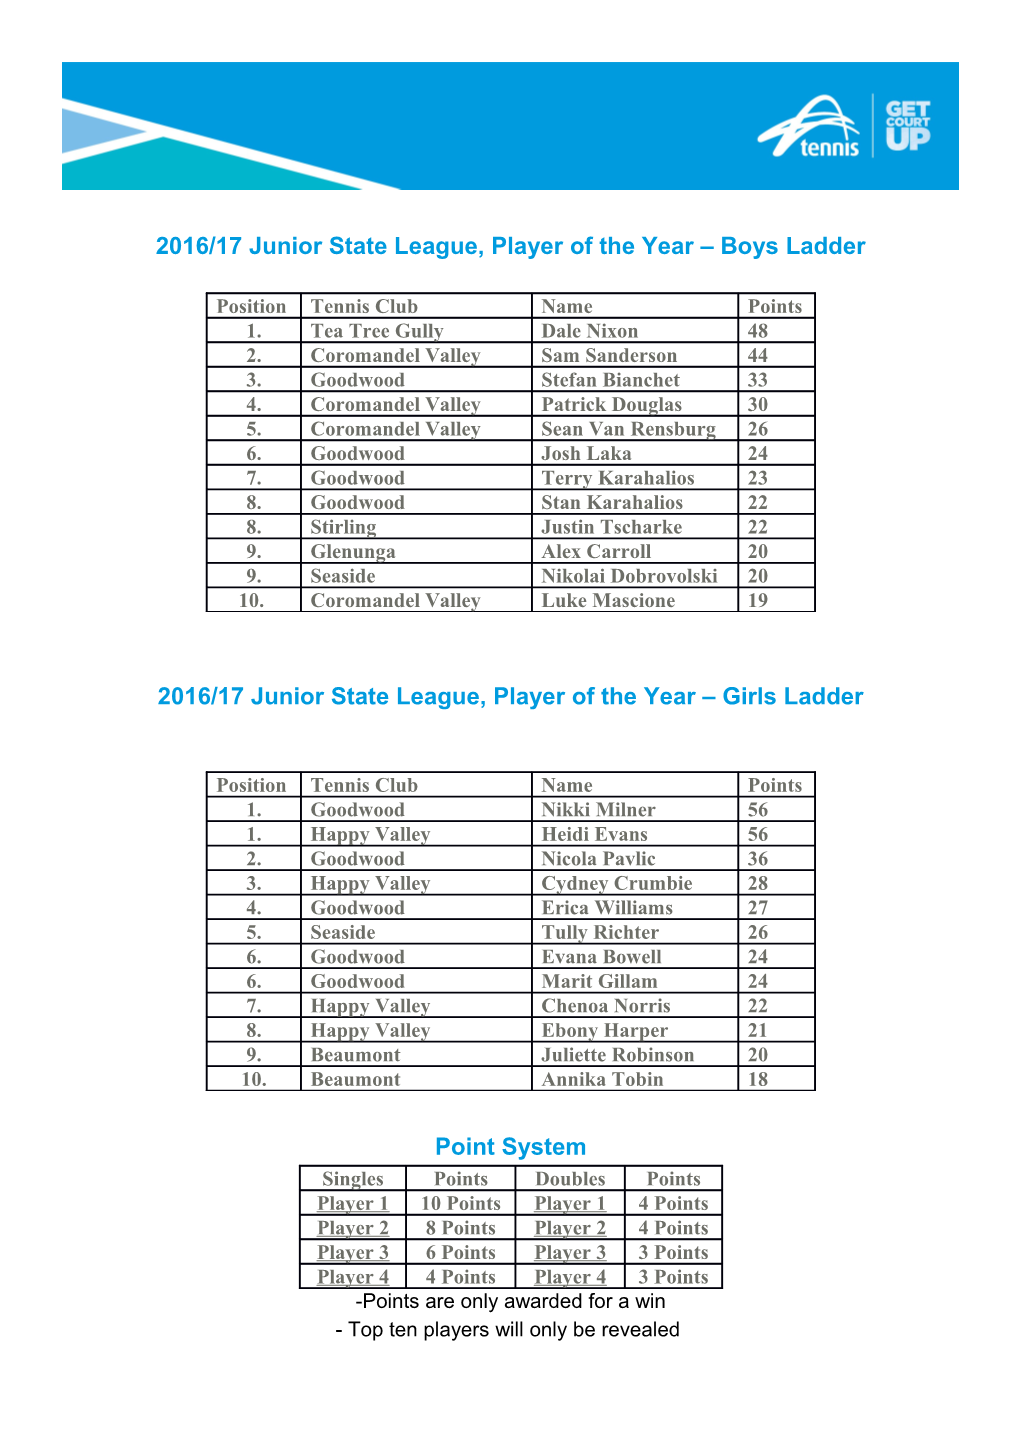 2016/17 Junior State League, Player of the Year Boys Ladder